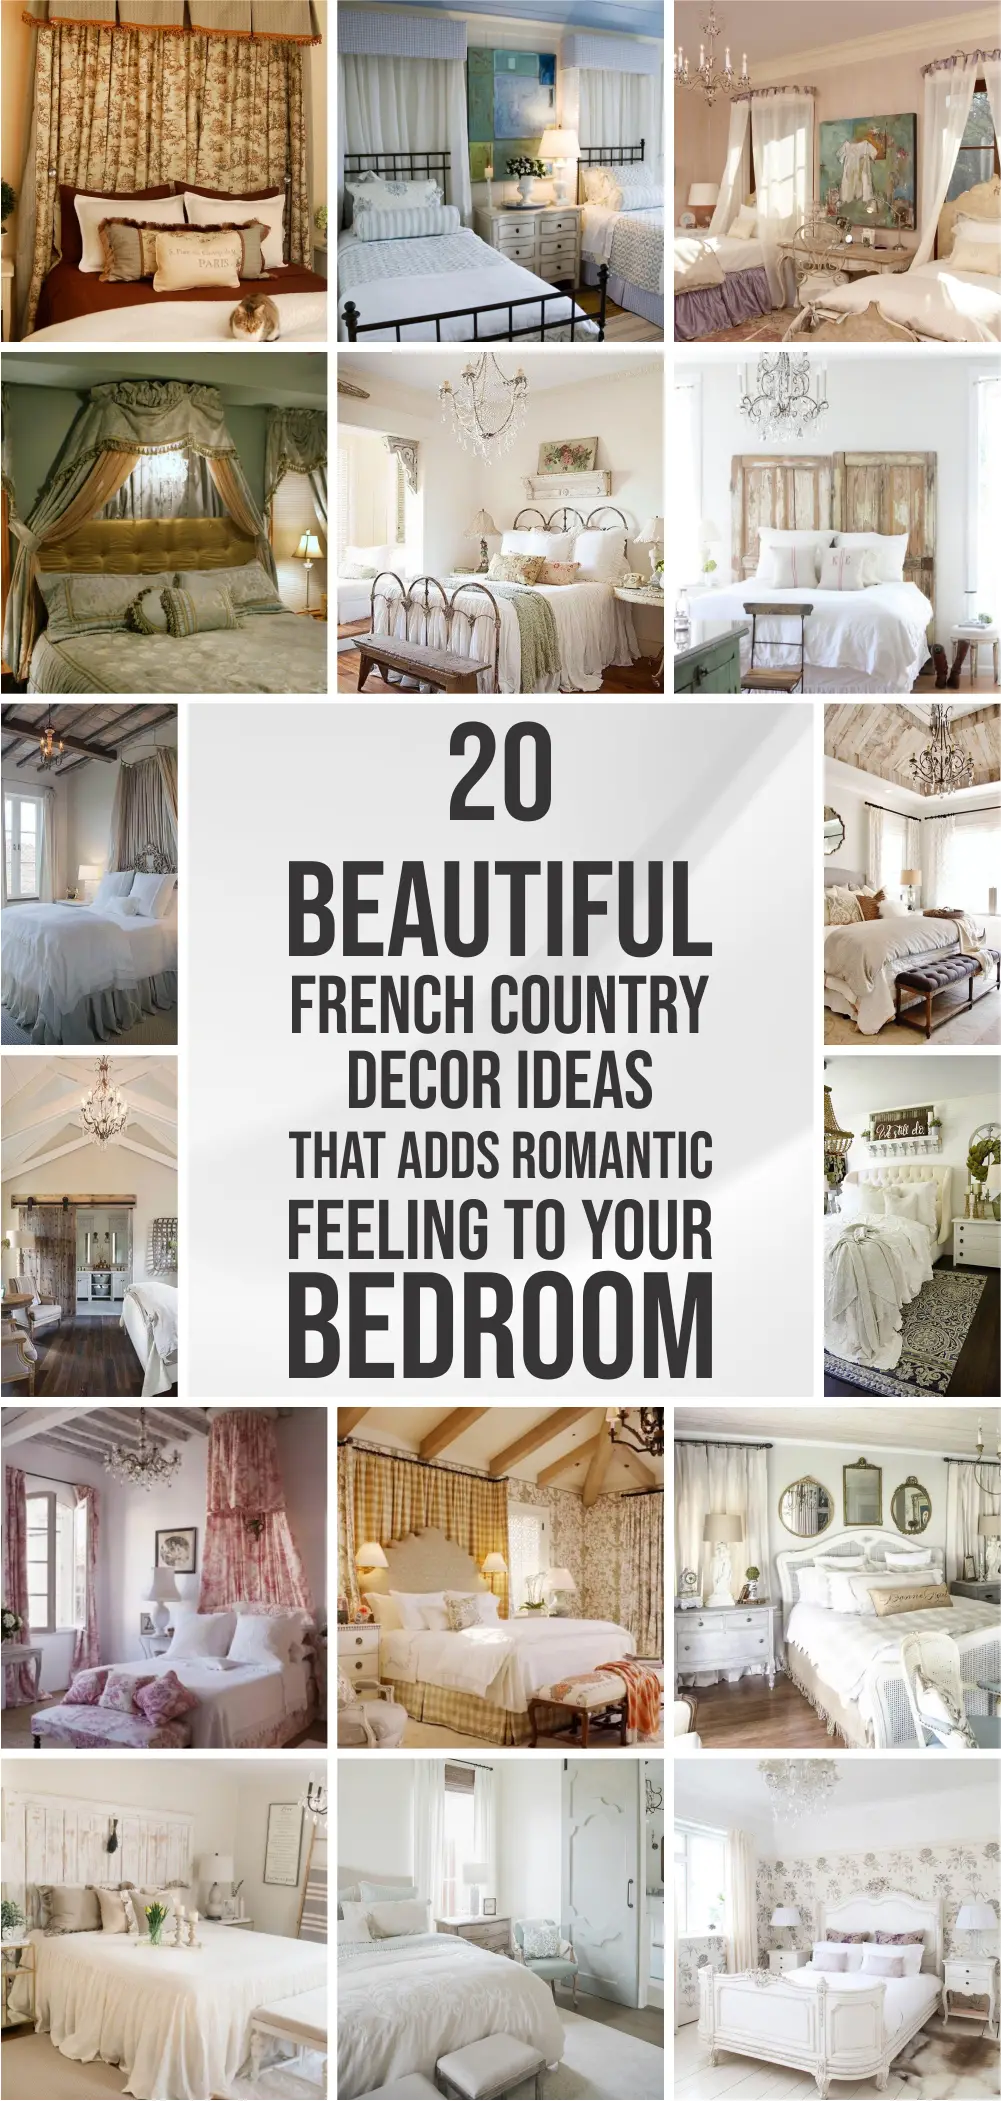 20 Beautiful French Country Decor Ideas That Adds Romantic Feeling To Your Bedroom Talkdecor - French Country Style Bedroom Decorating Ideas